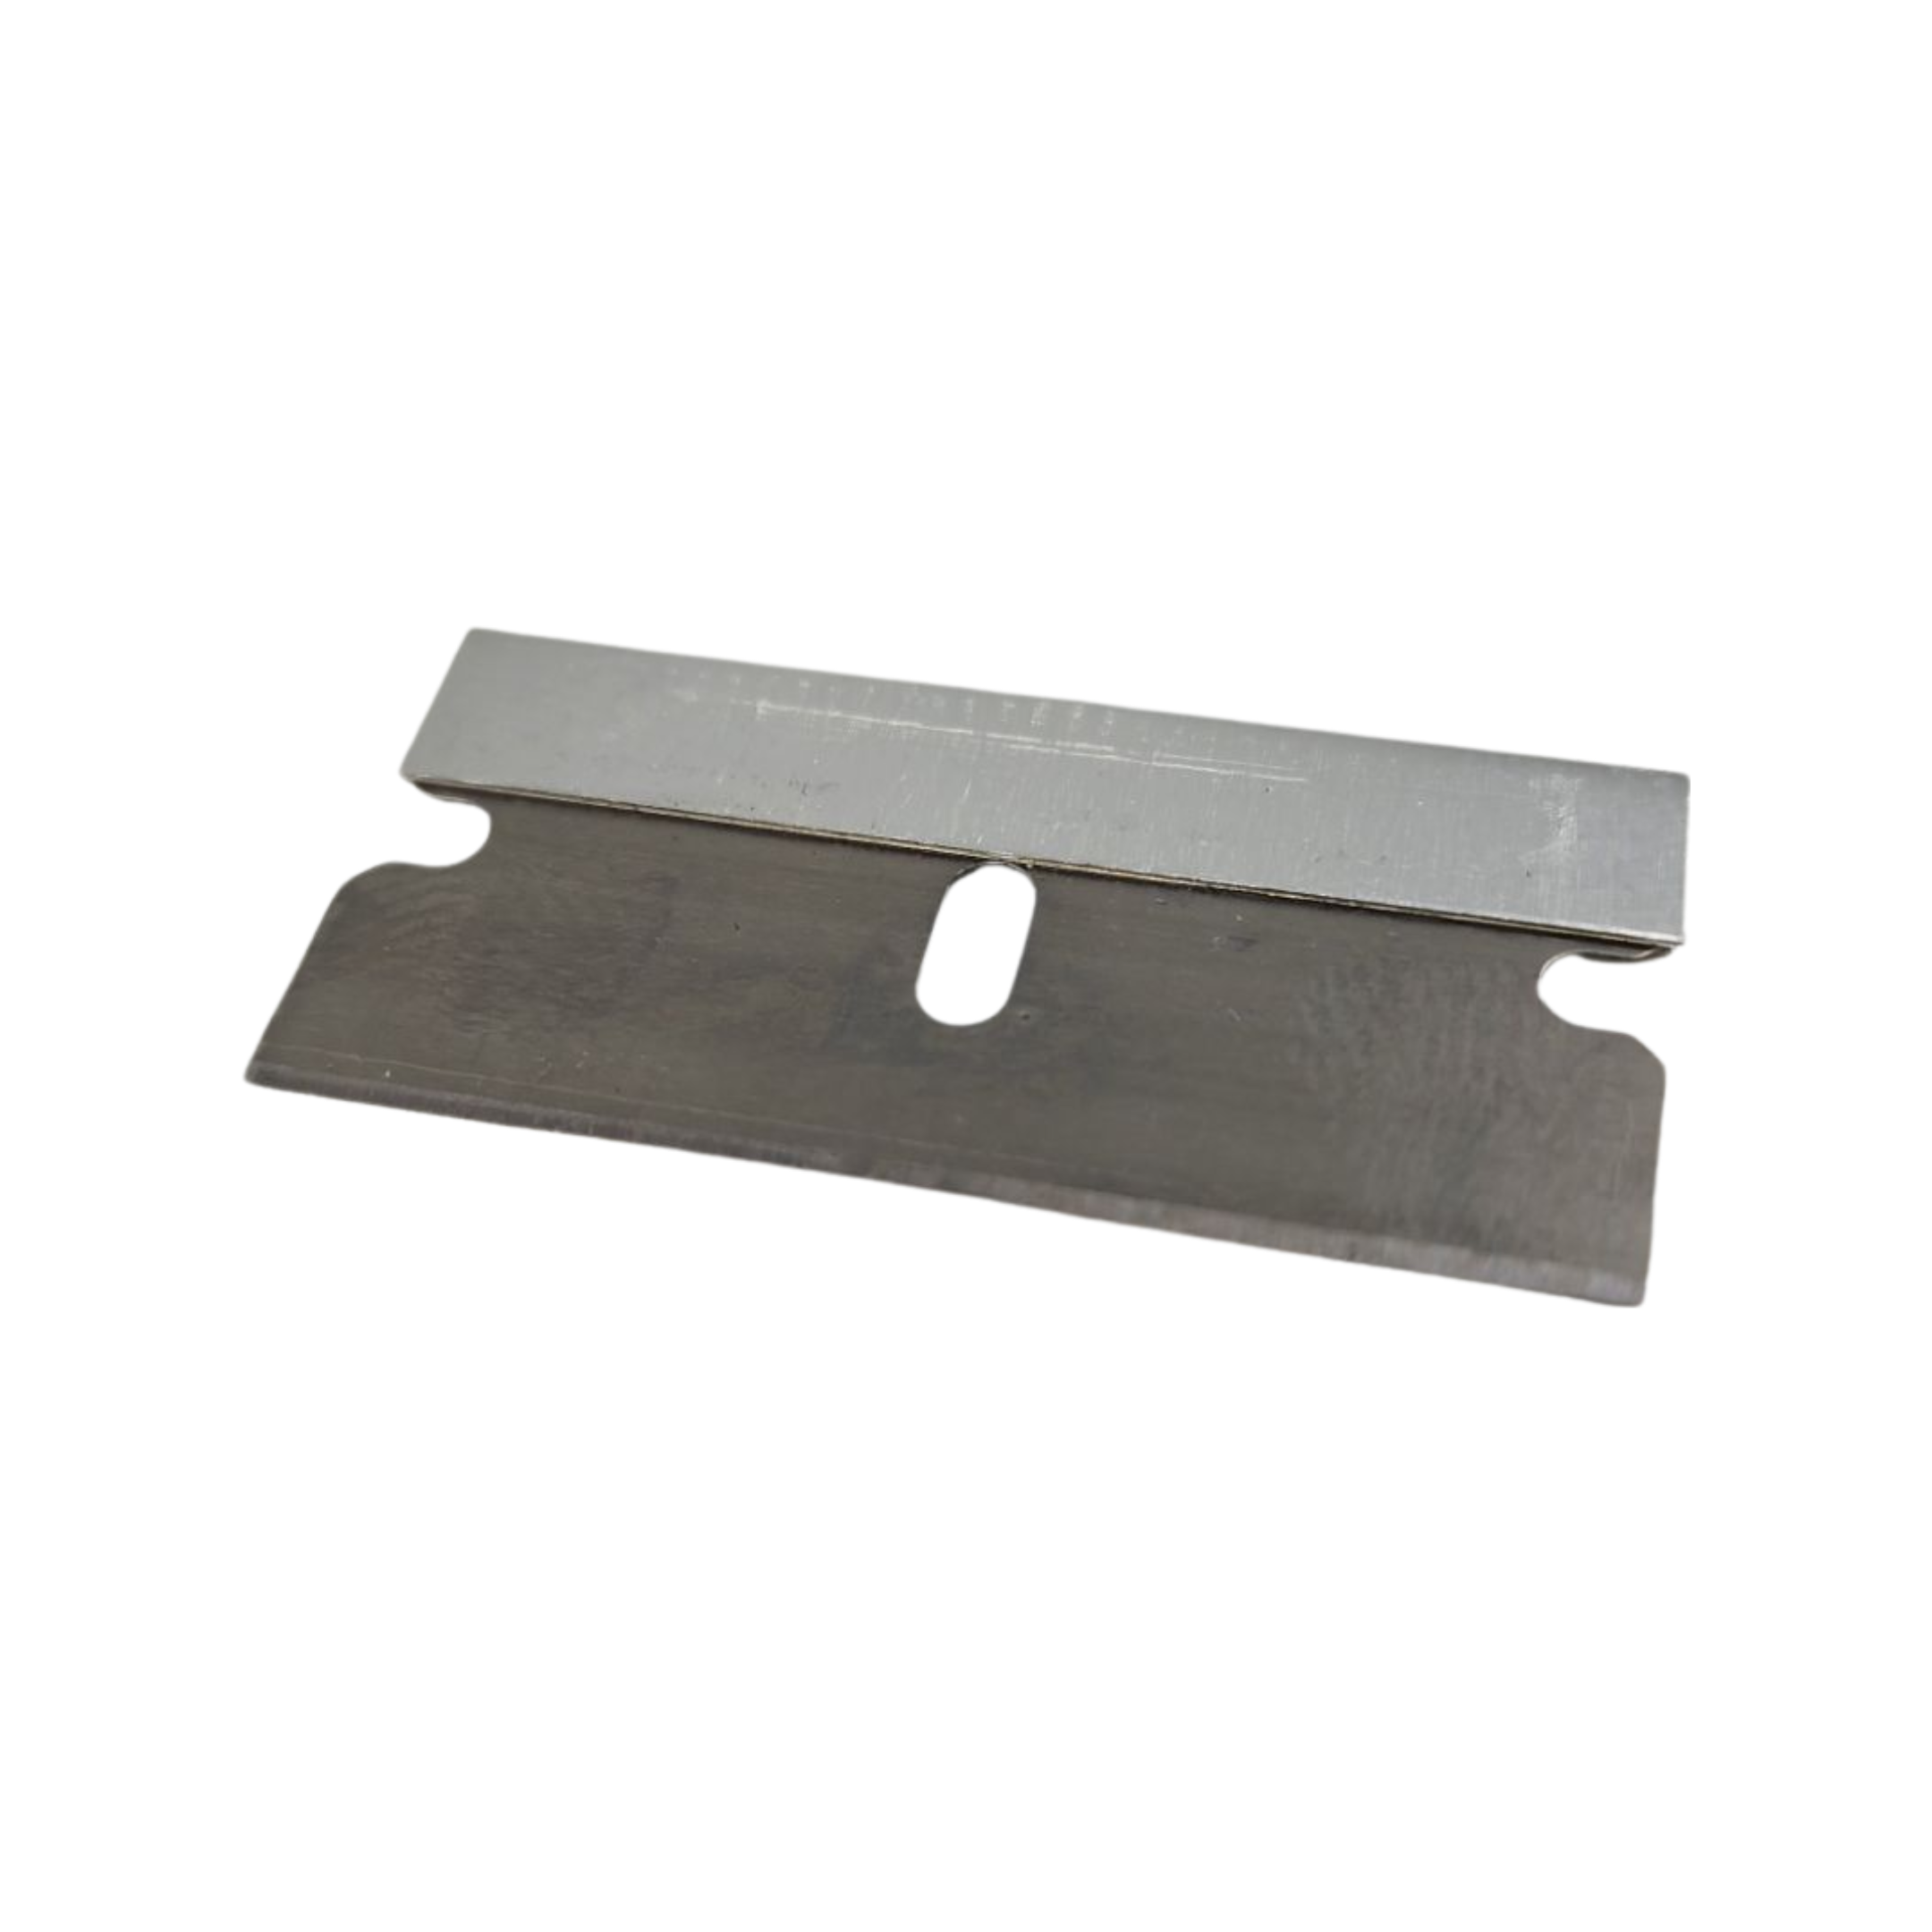 Mr Scrapey Metal Blade Replacement (1pc)